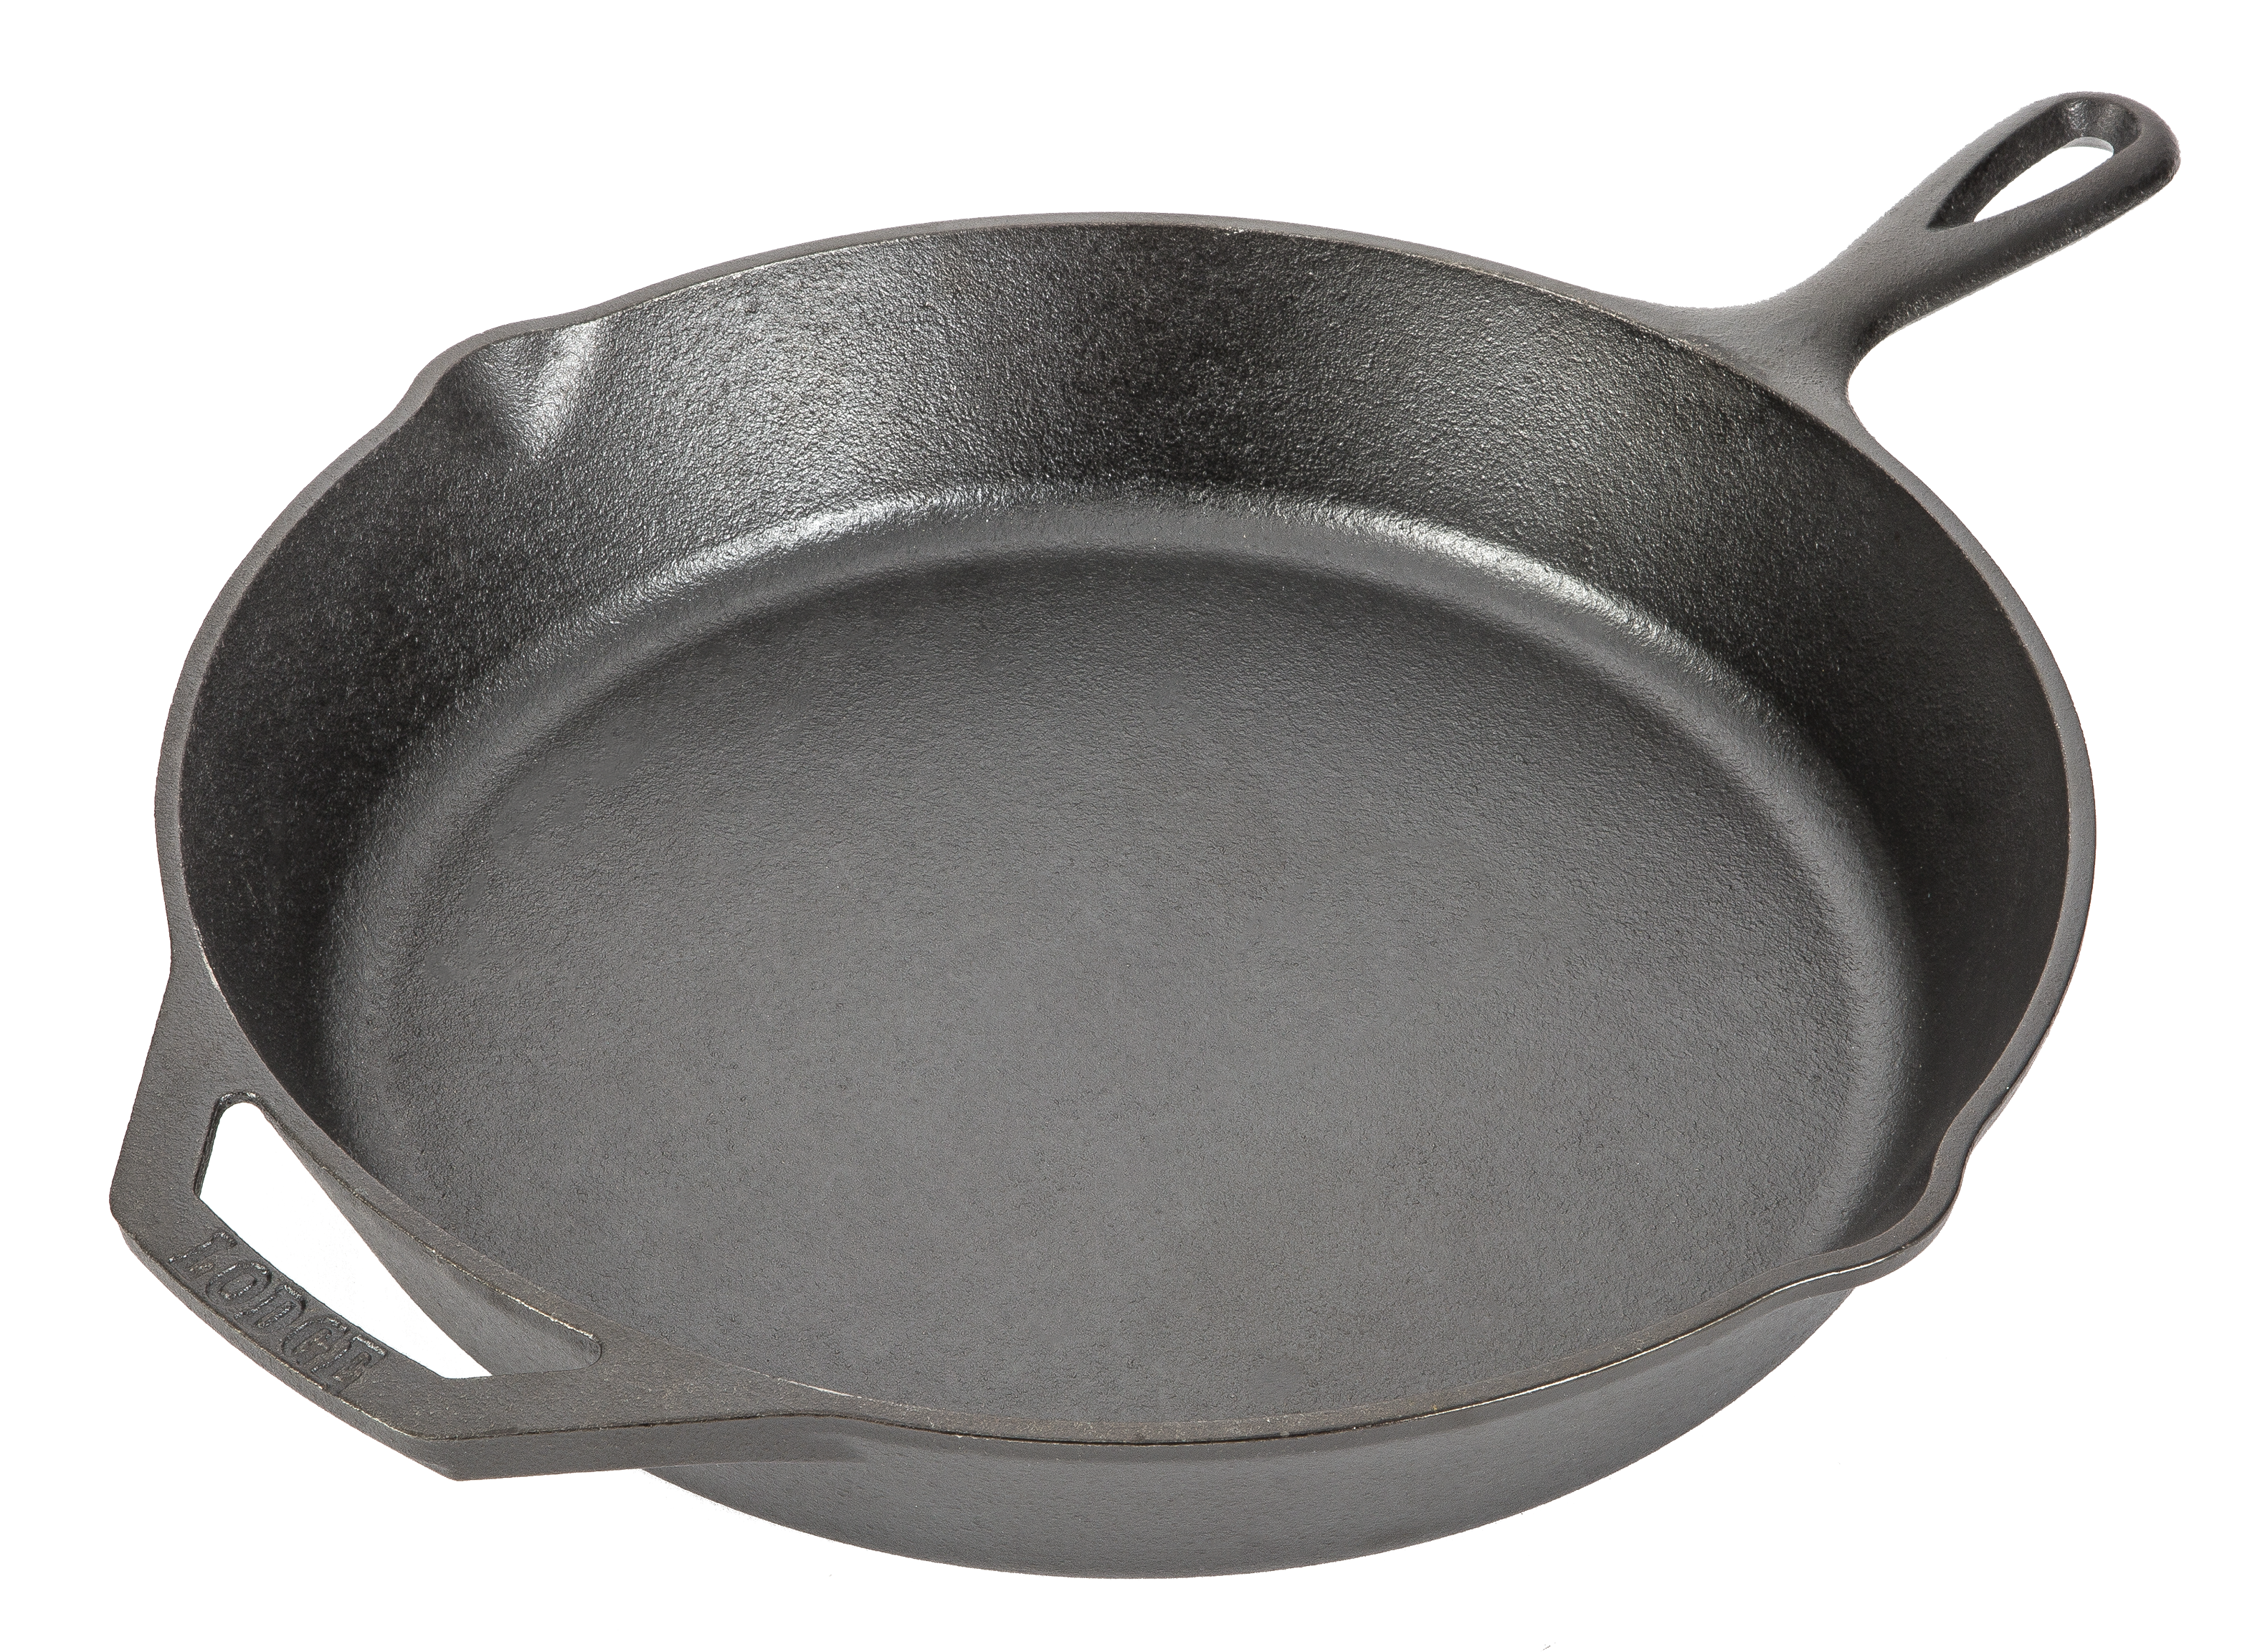 Lodge Classic Cast Iron Cookware Review - Consumer Reports